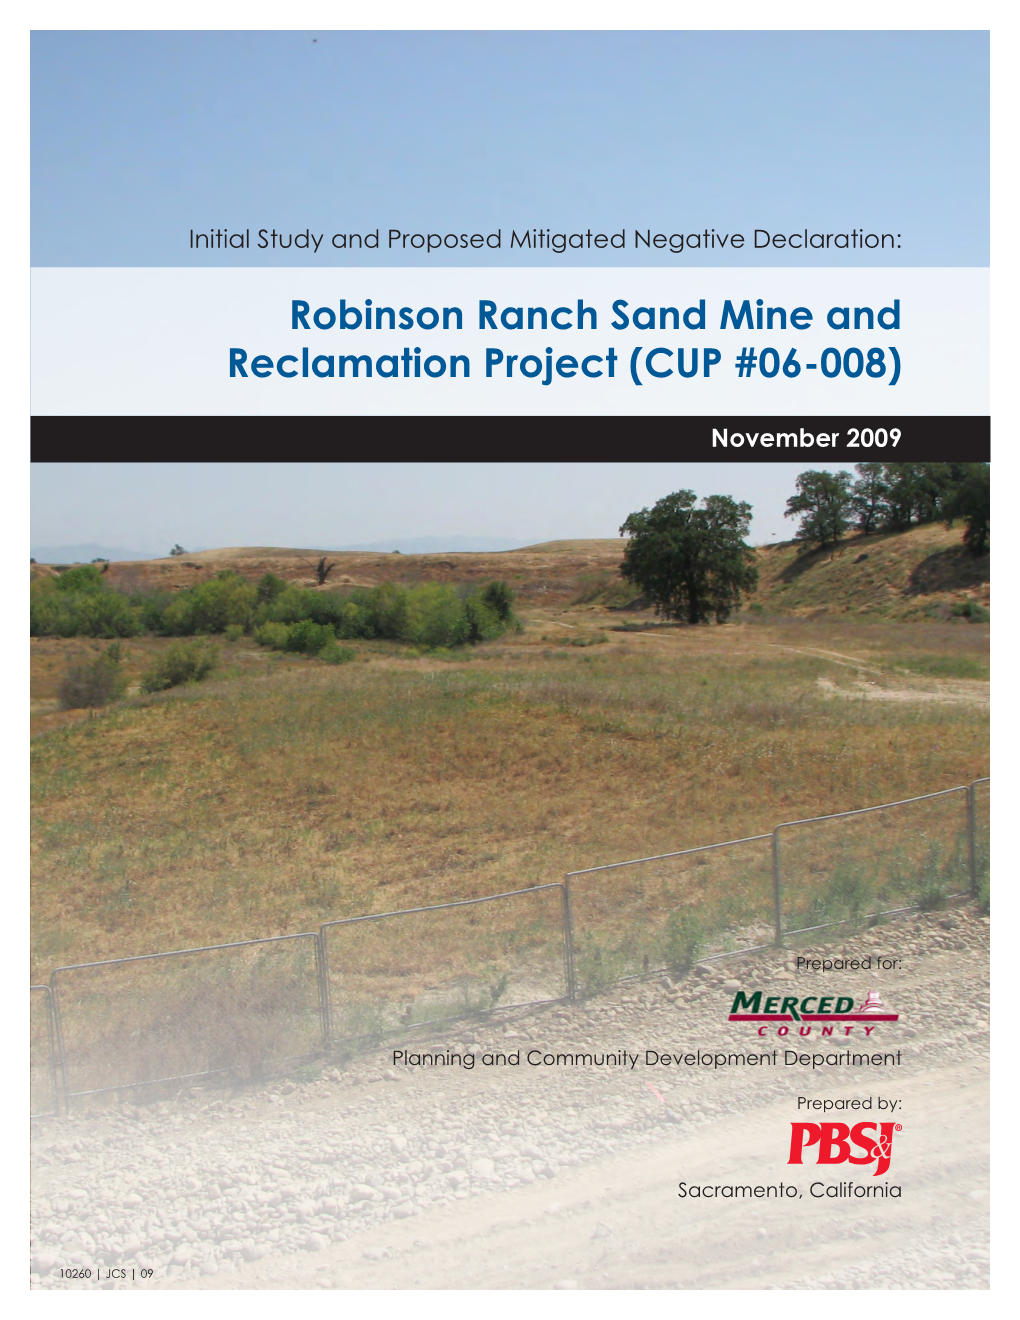 Robinson Ranch Sand Mine and Reclamation Project (CUP #06-008)